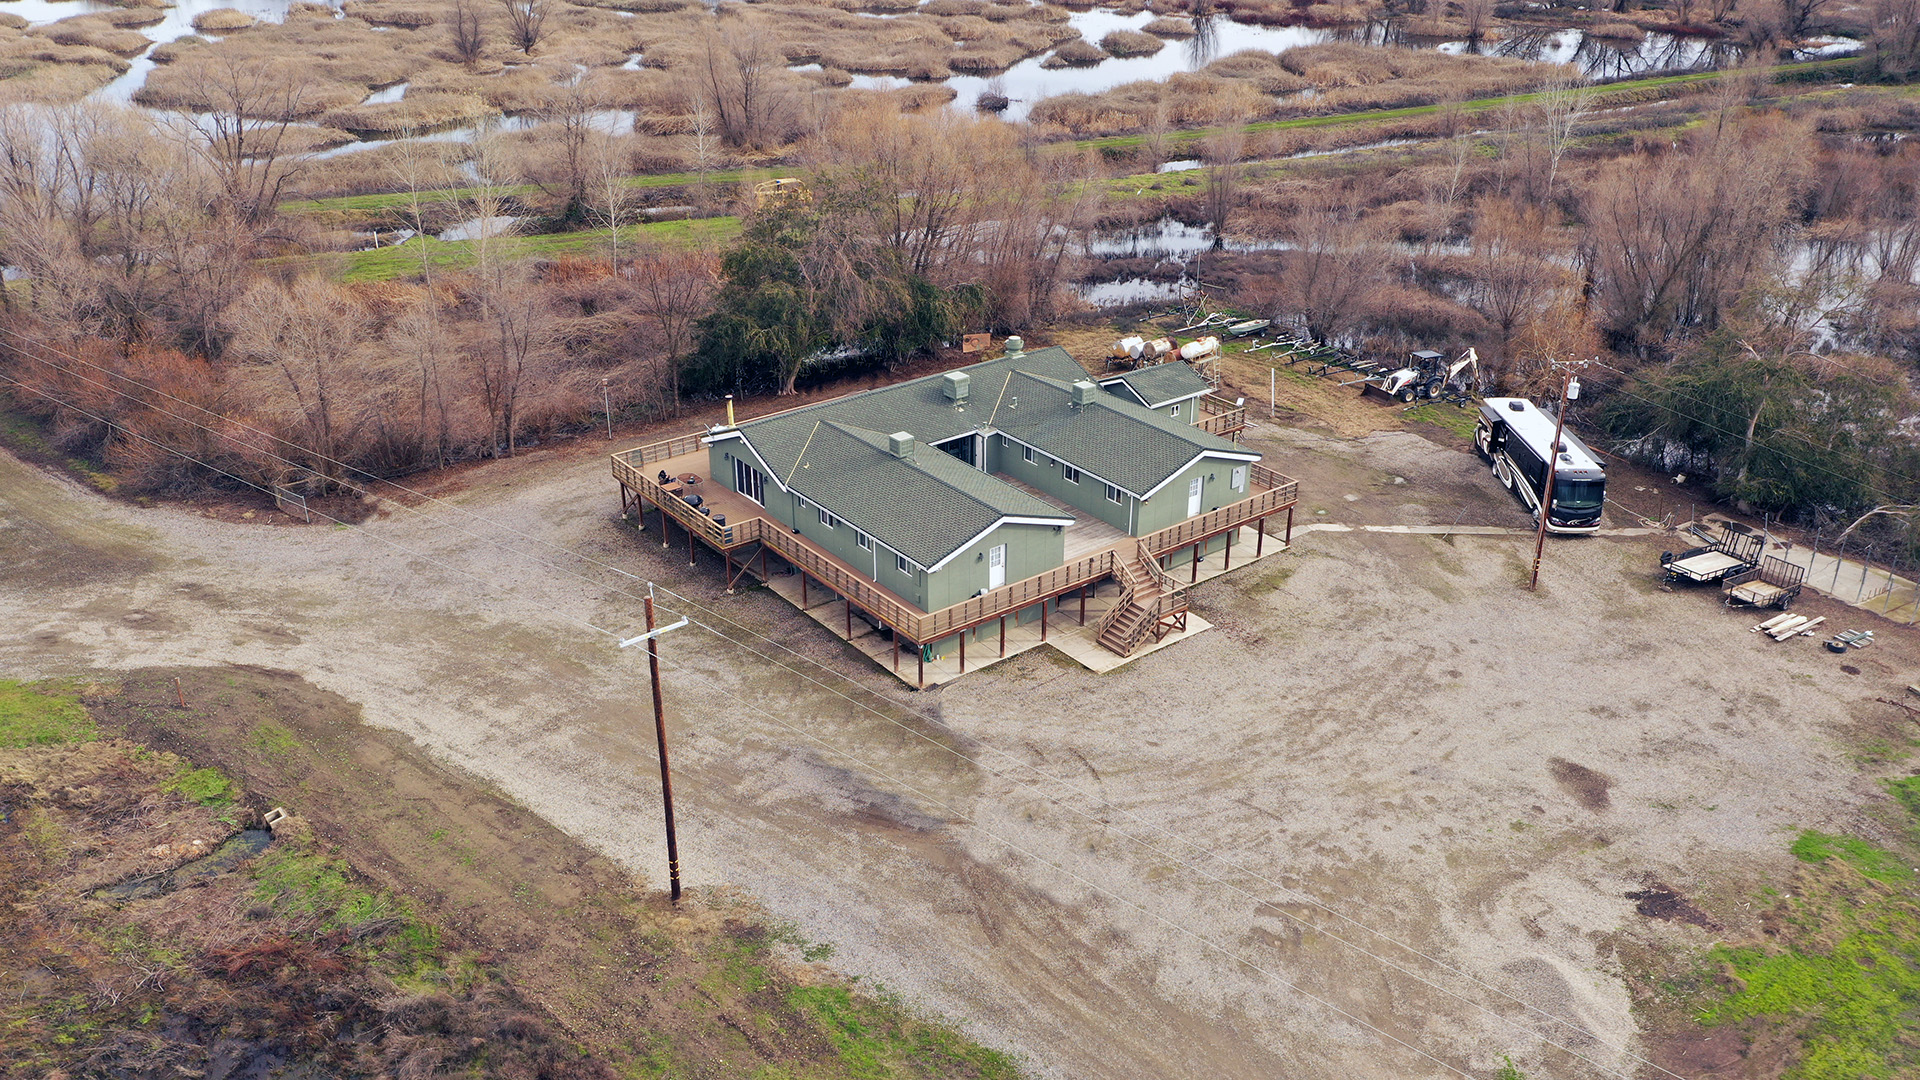 arial photos and clubhouse photos of the Brady ranch duck club in the Butte Sink, California